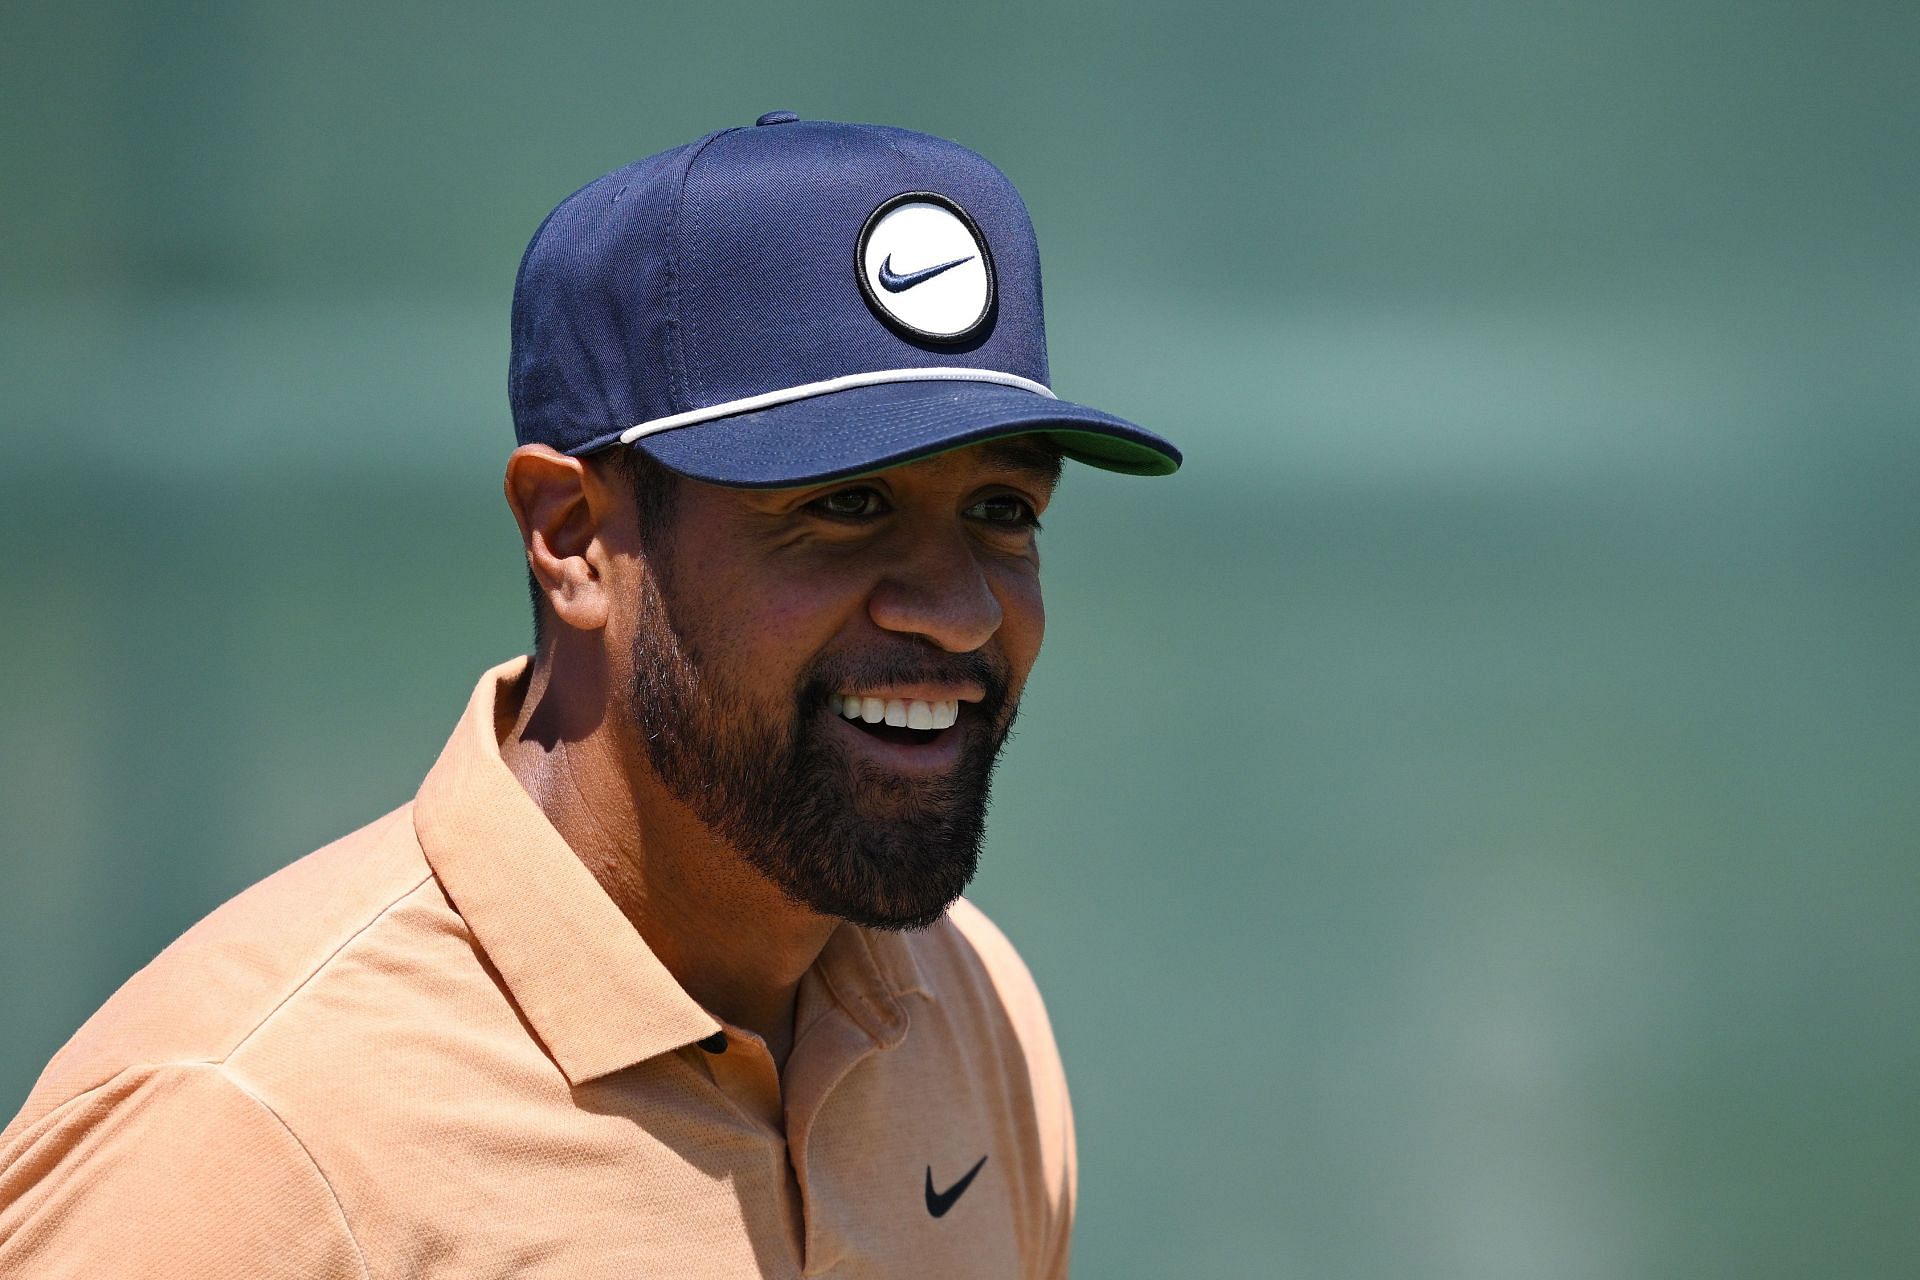 Tony Finau leads the Mexico Open at Vidanta after two rounds